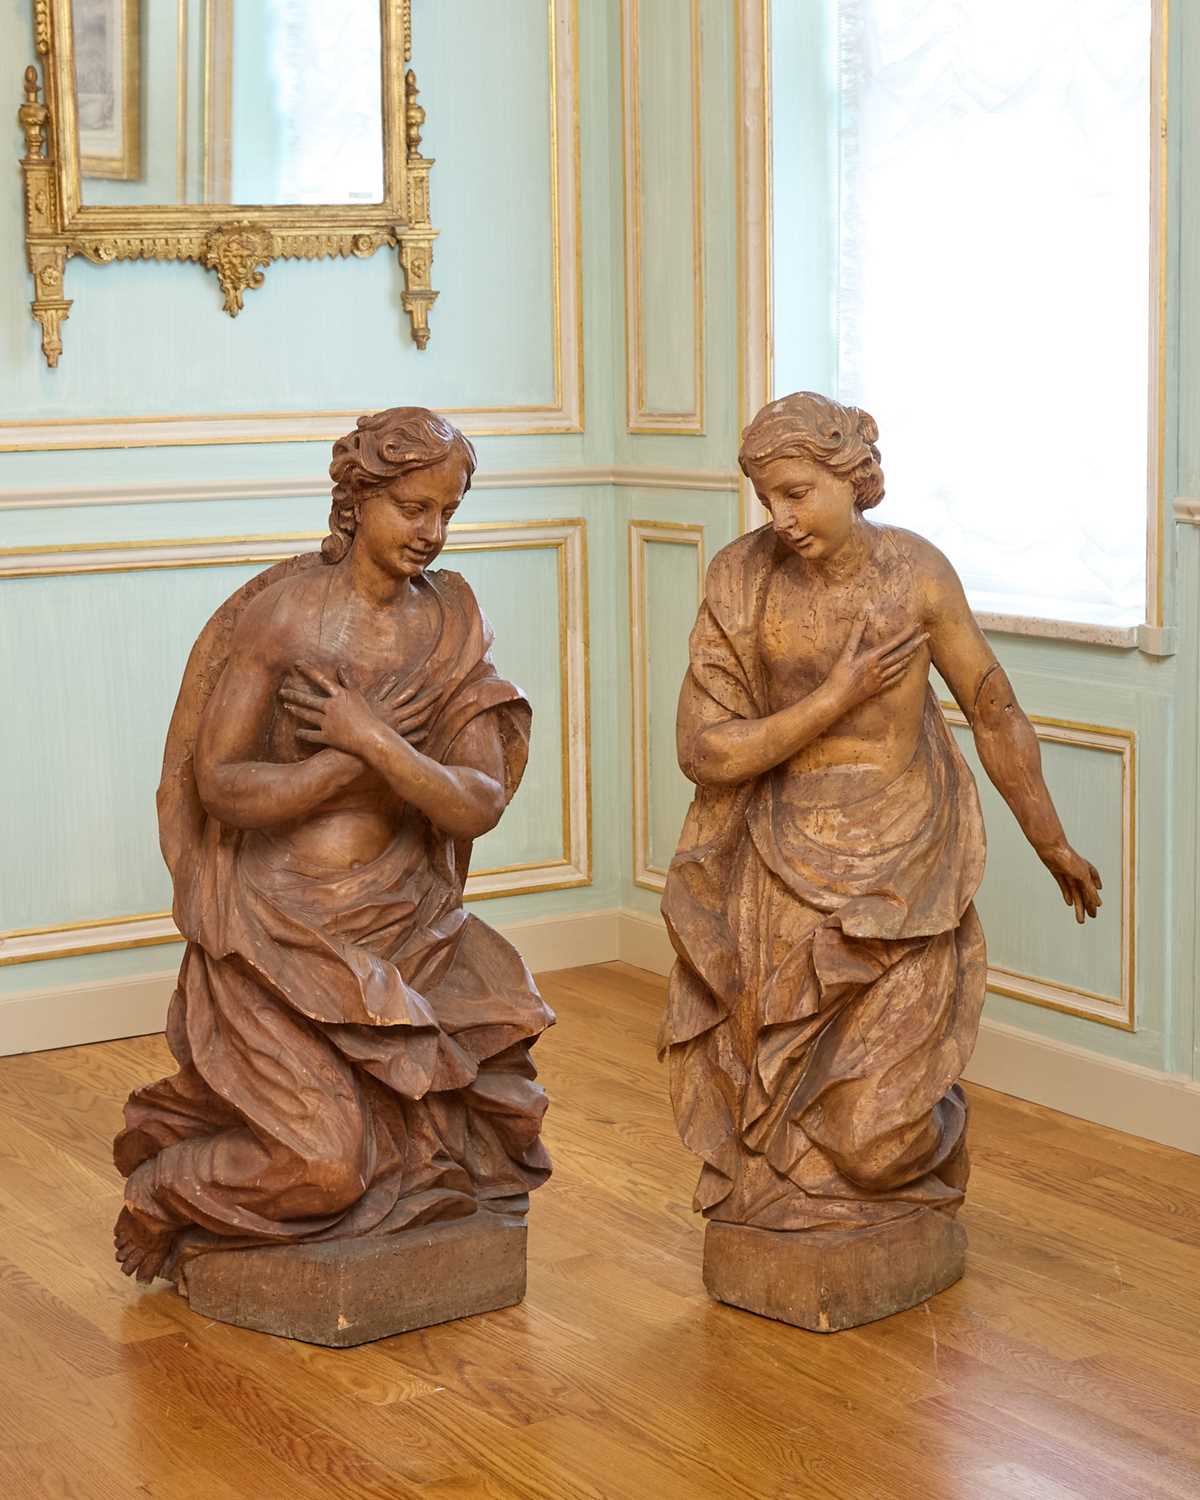 Lot 352 - Large Pair of German Rococo Carved Wood Figural Sculptures